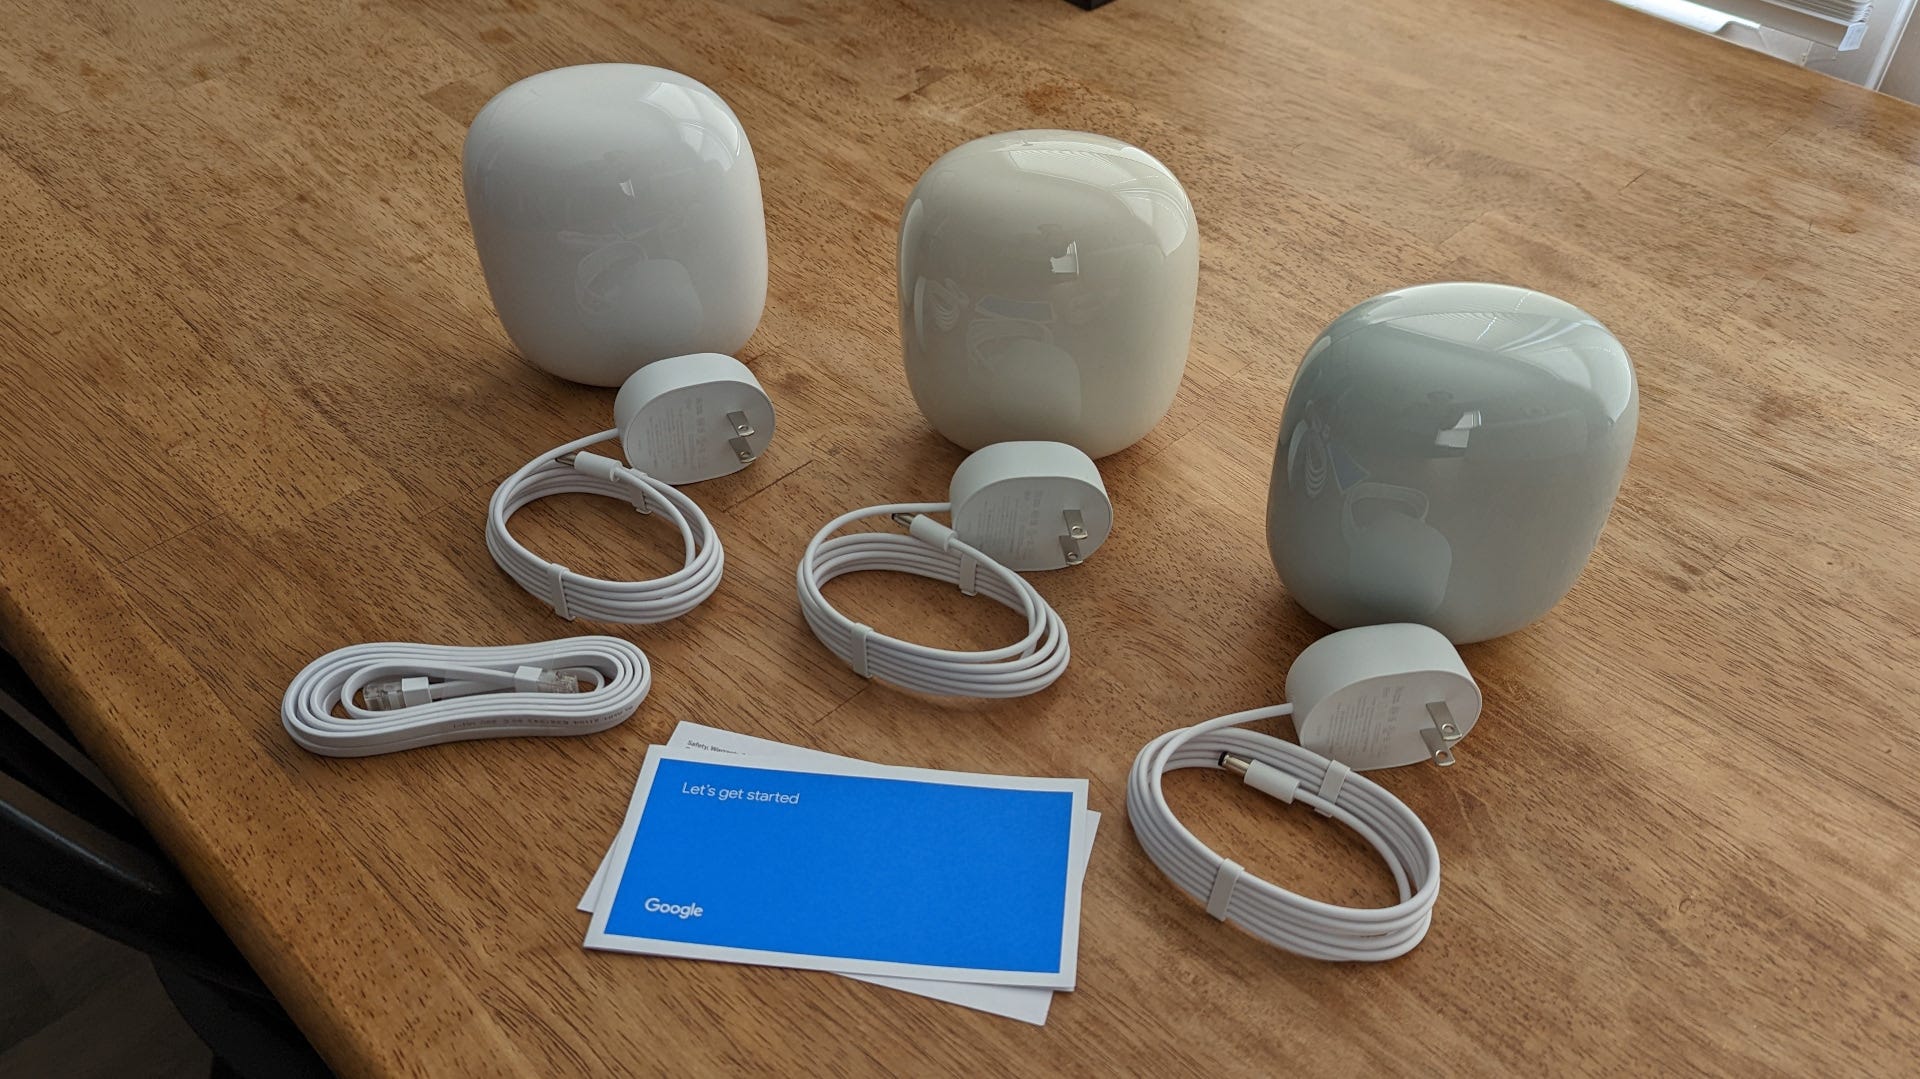 Contents of a Nest Wifi Pro three-pack, including routers, power cords, Ethernet cable, and manuals.